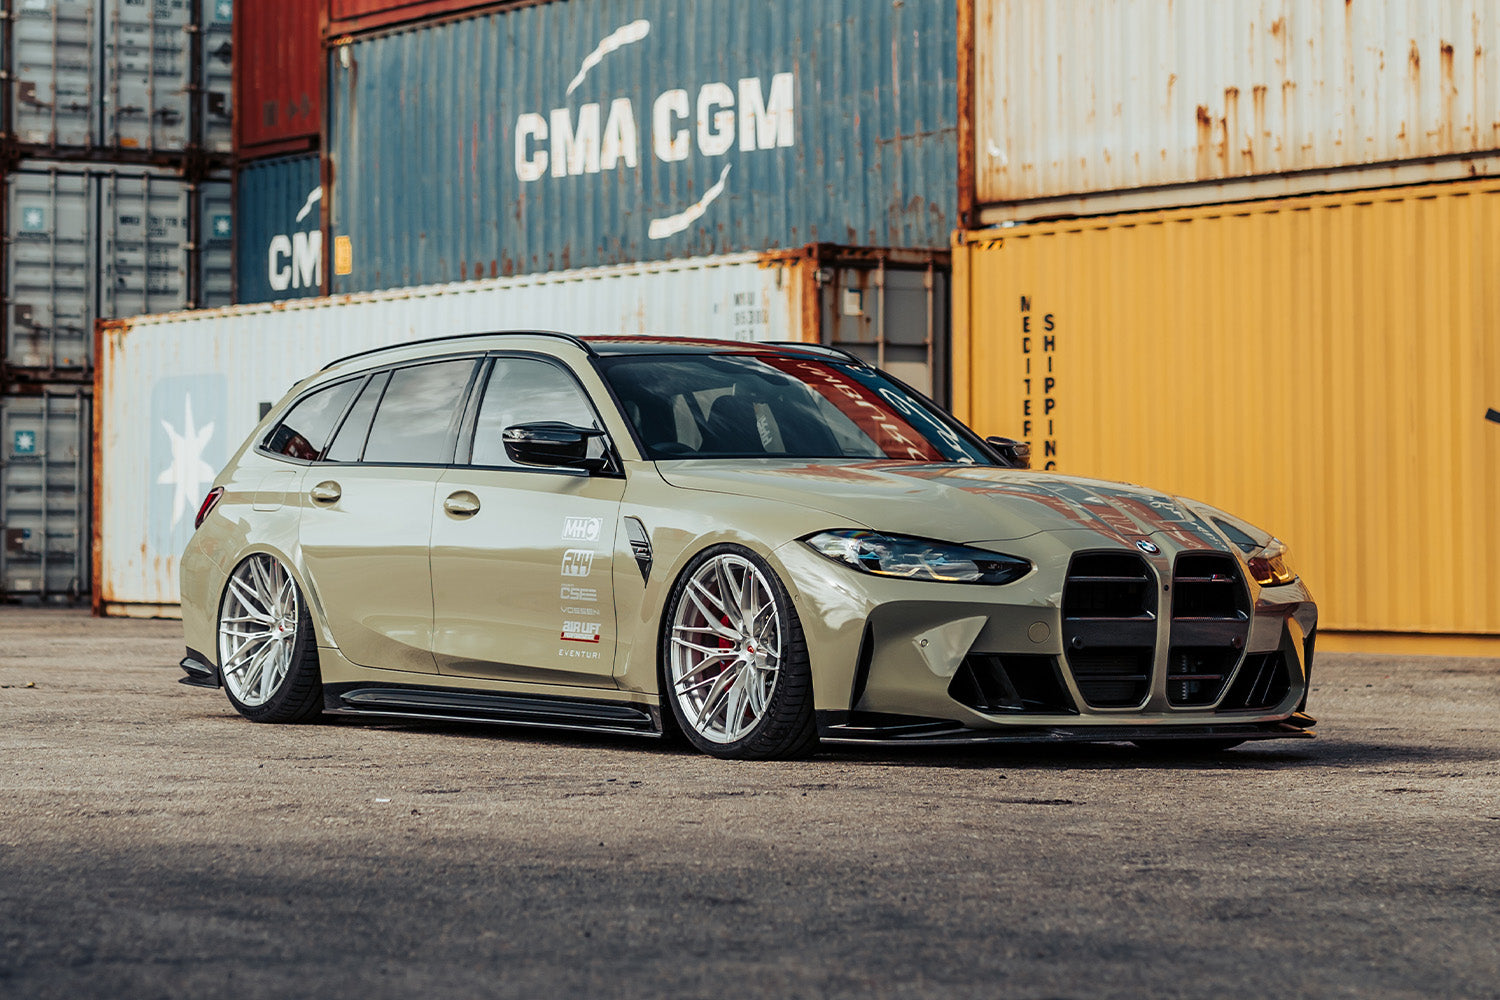 Building the first modified BMW G81 M3 Touring in the USA!